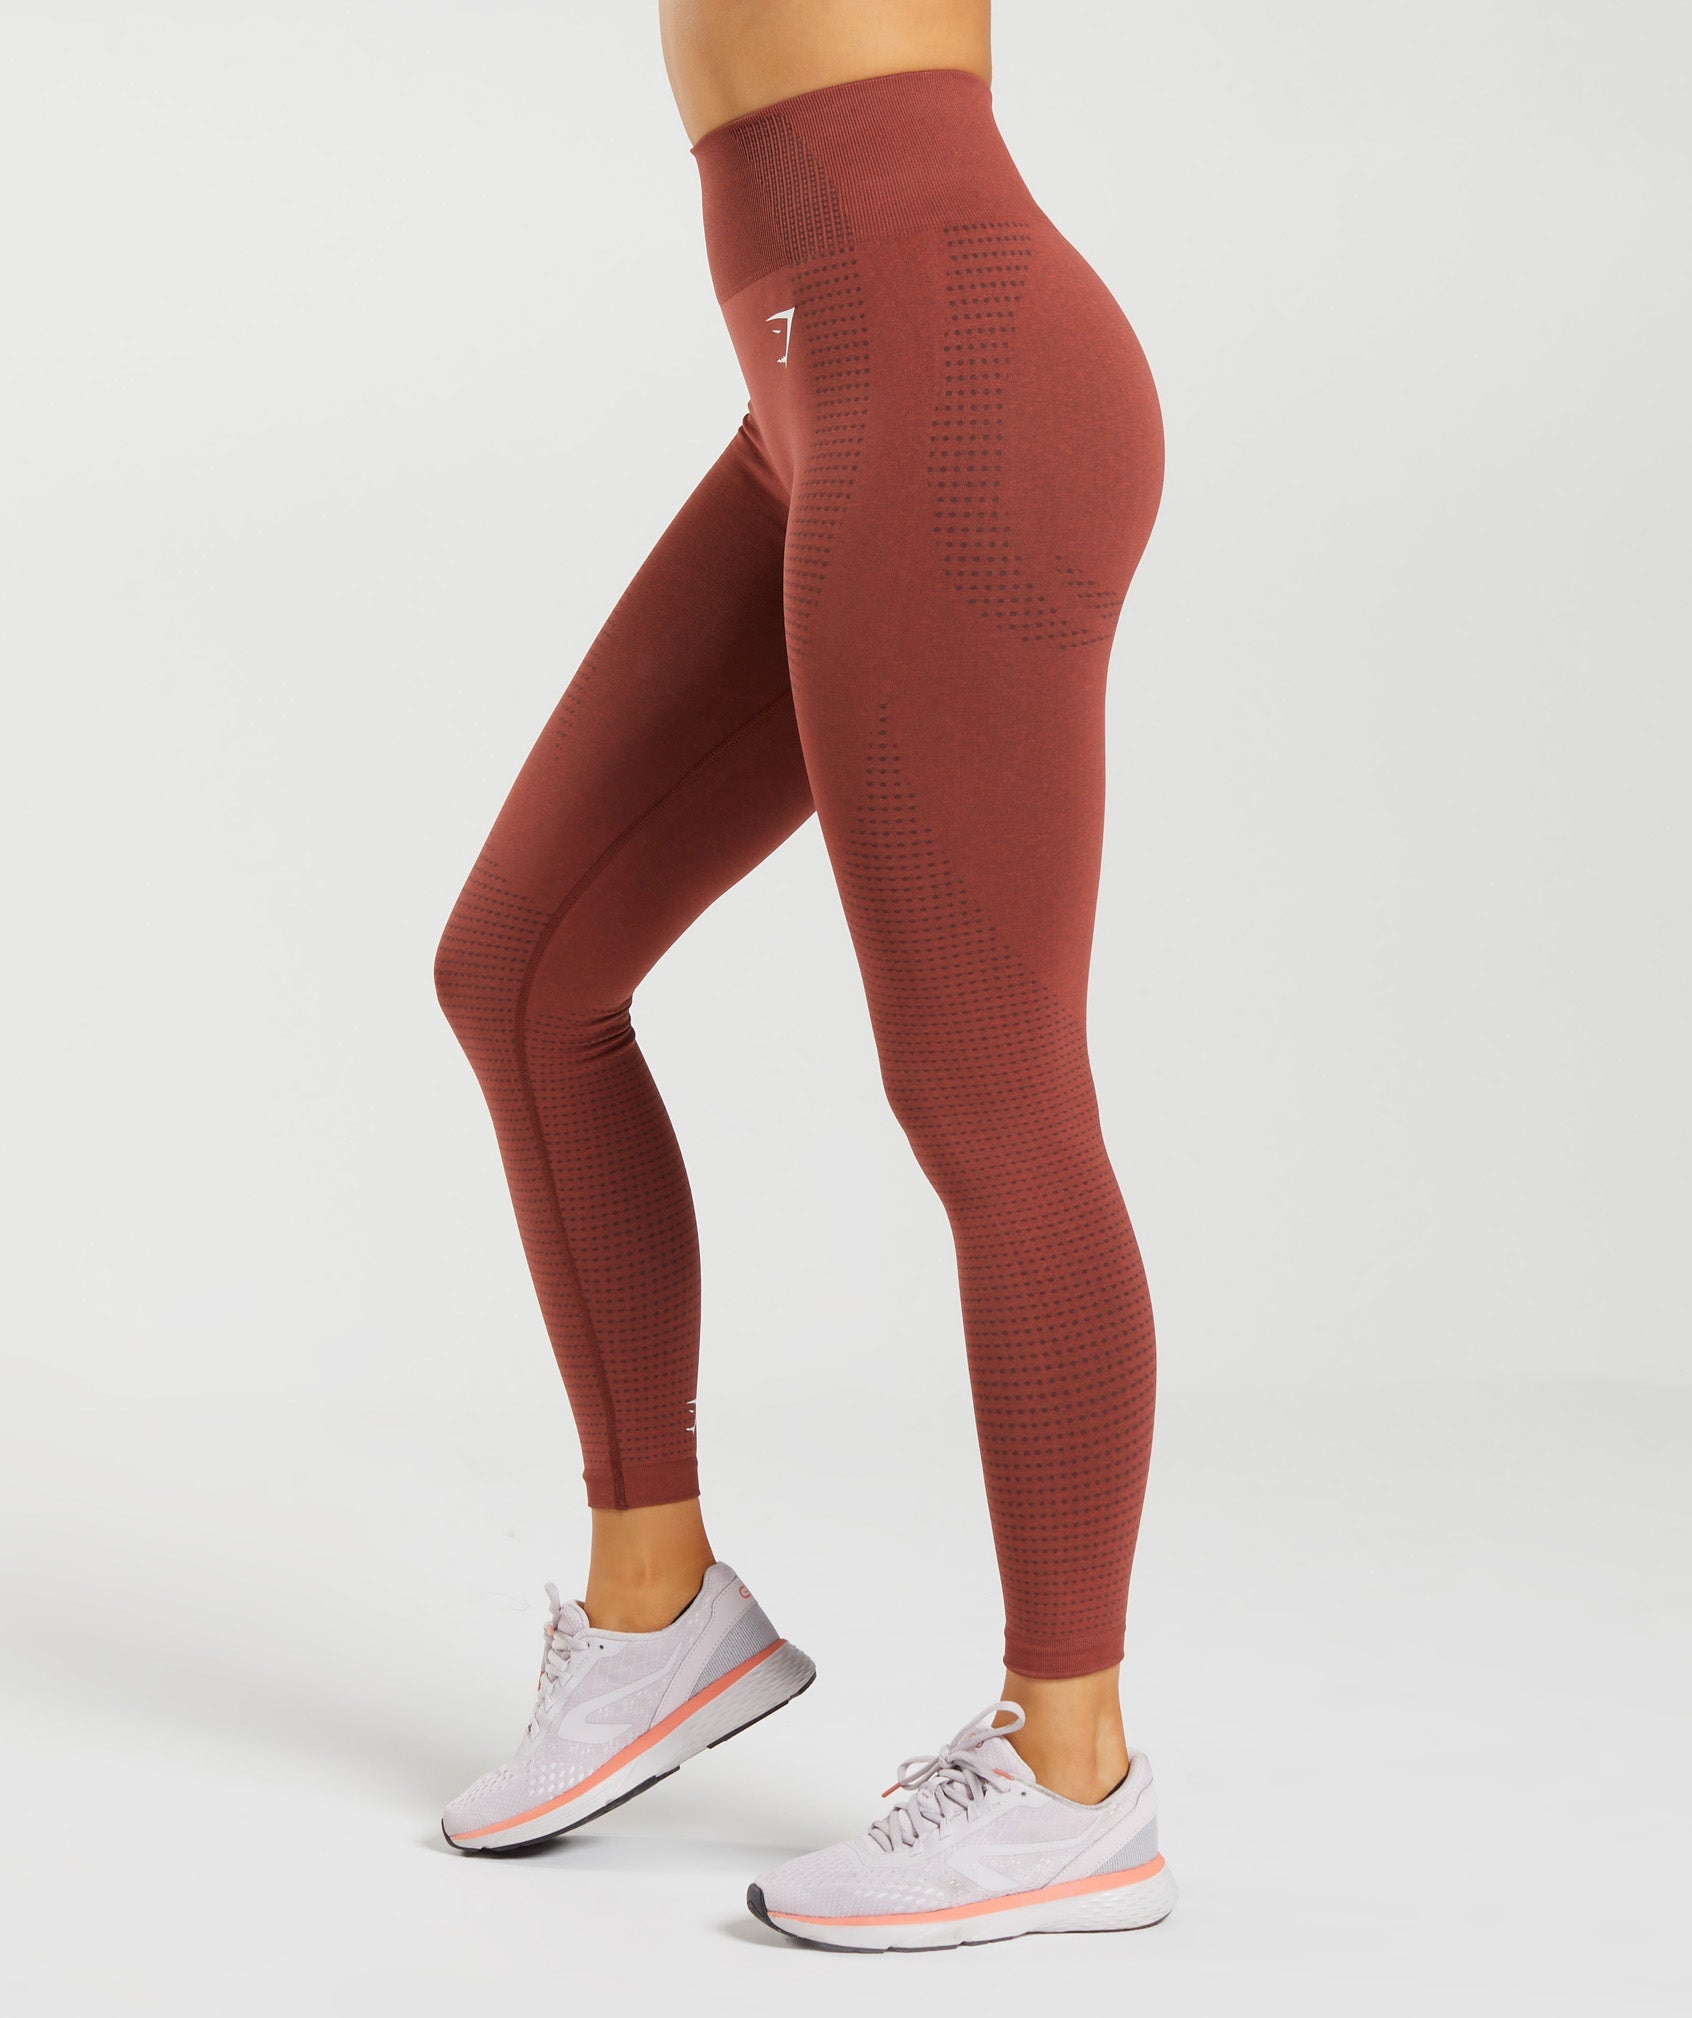 Gymshark Dreamy Leggings Red Size XS - $40 (33% Off Retail) - From